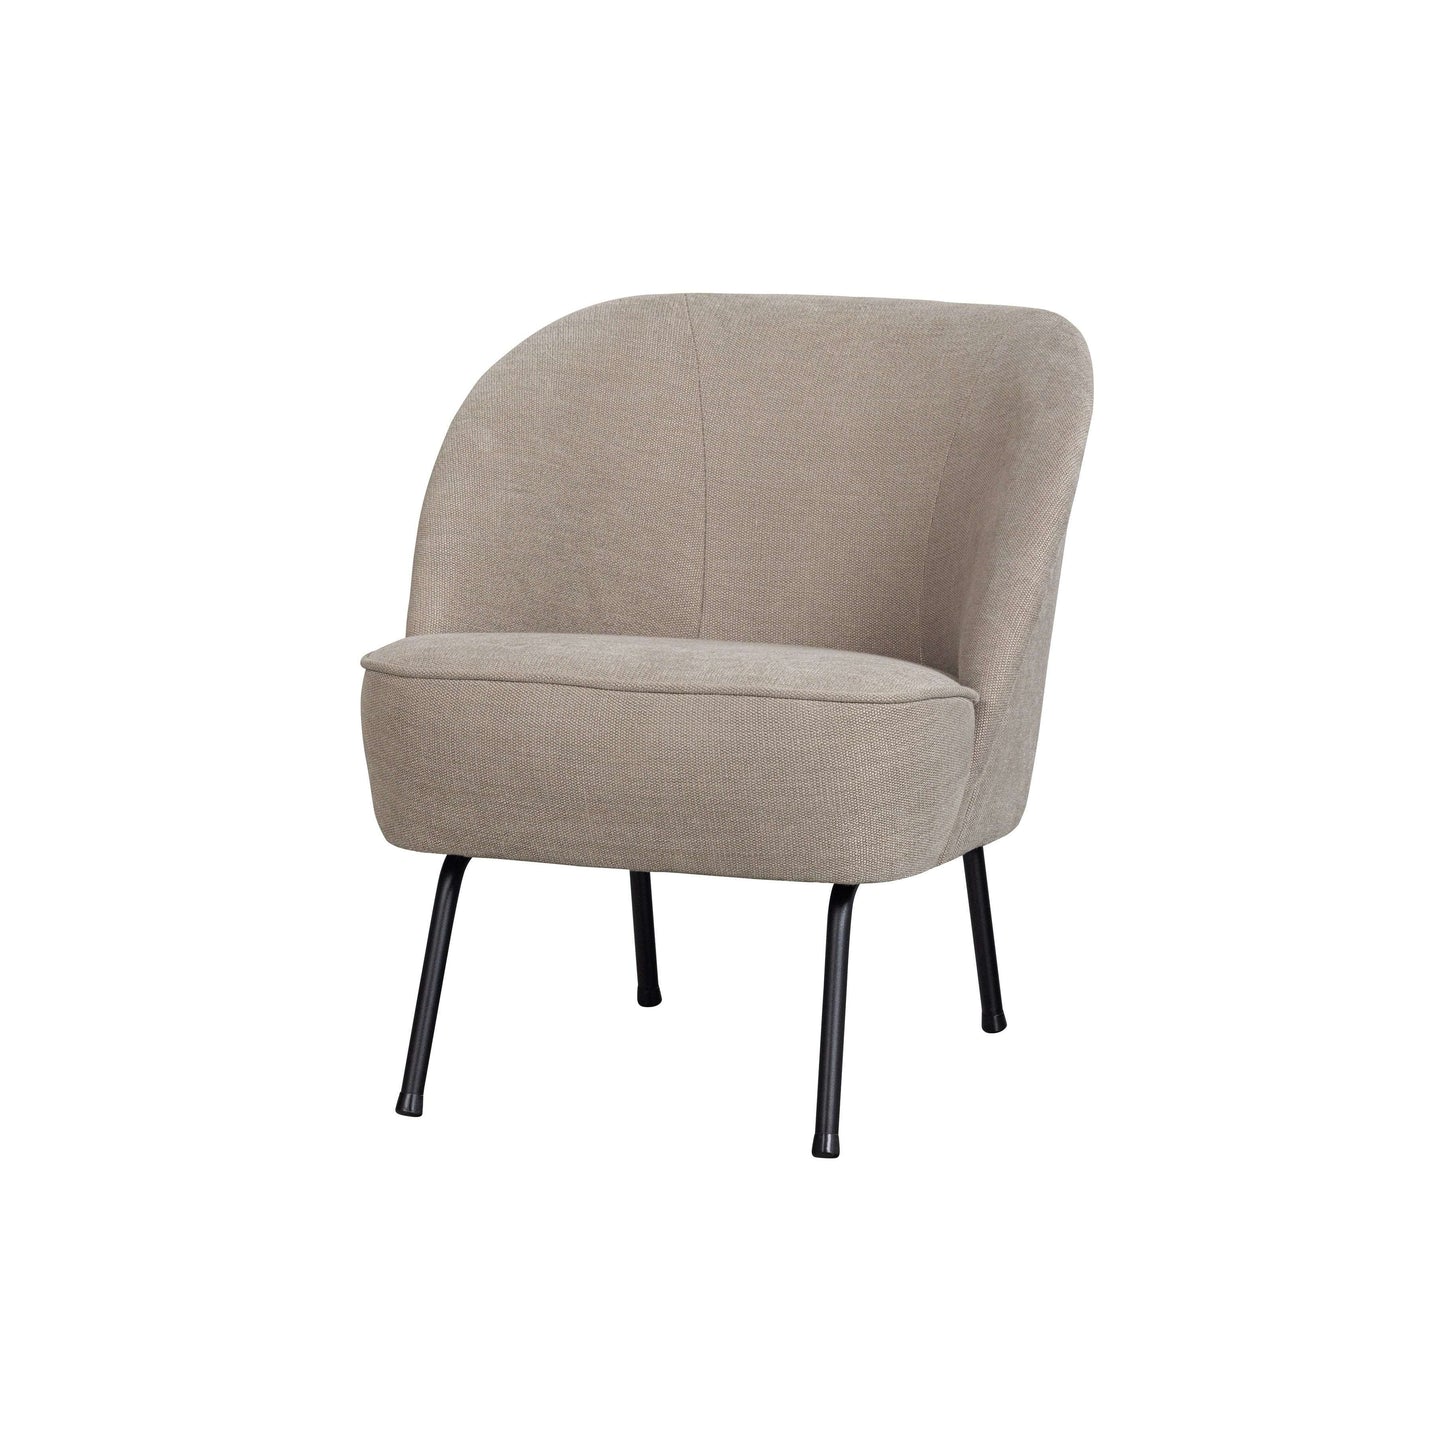 BePureHome Vogue fauteuil zand